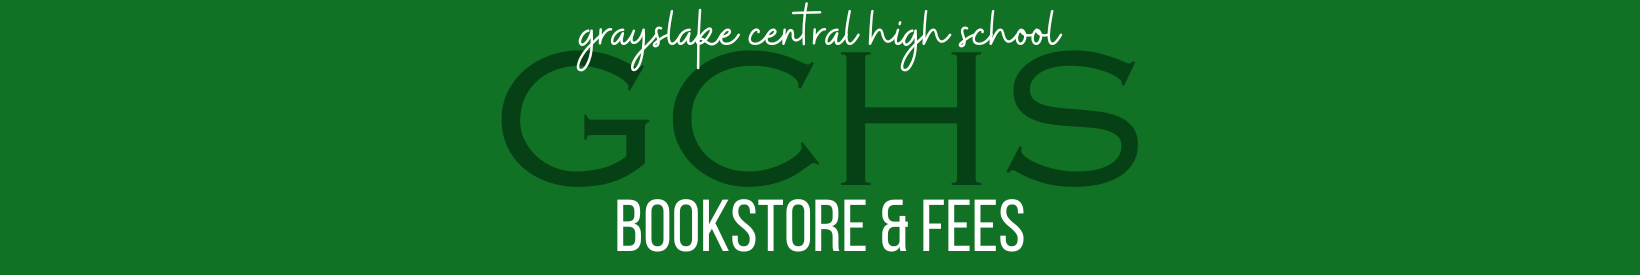 bookstore & fees